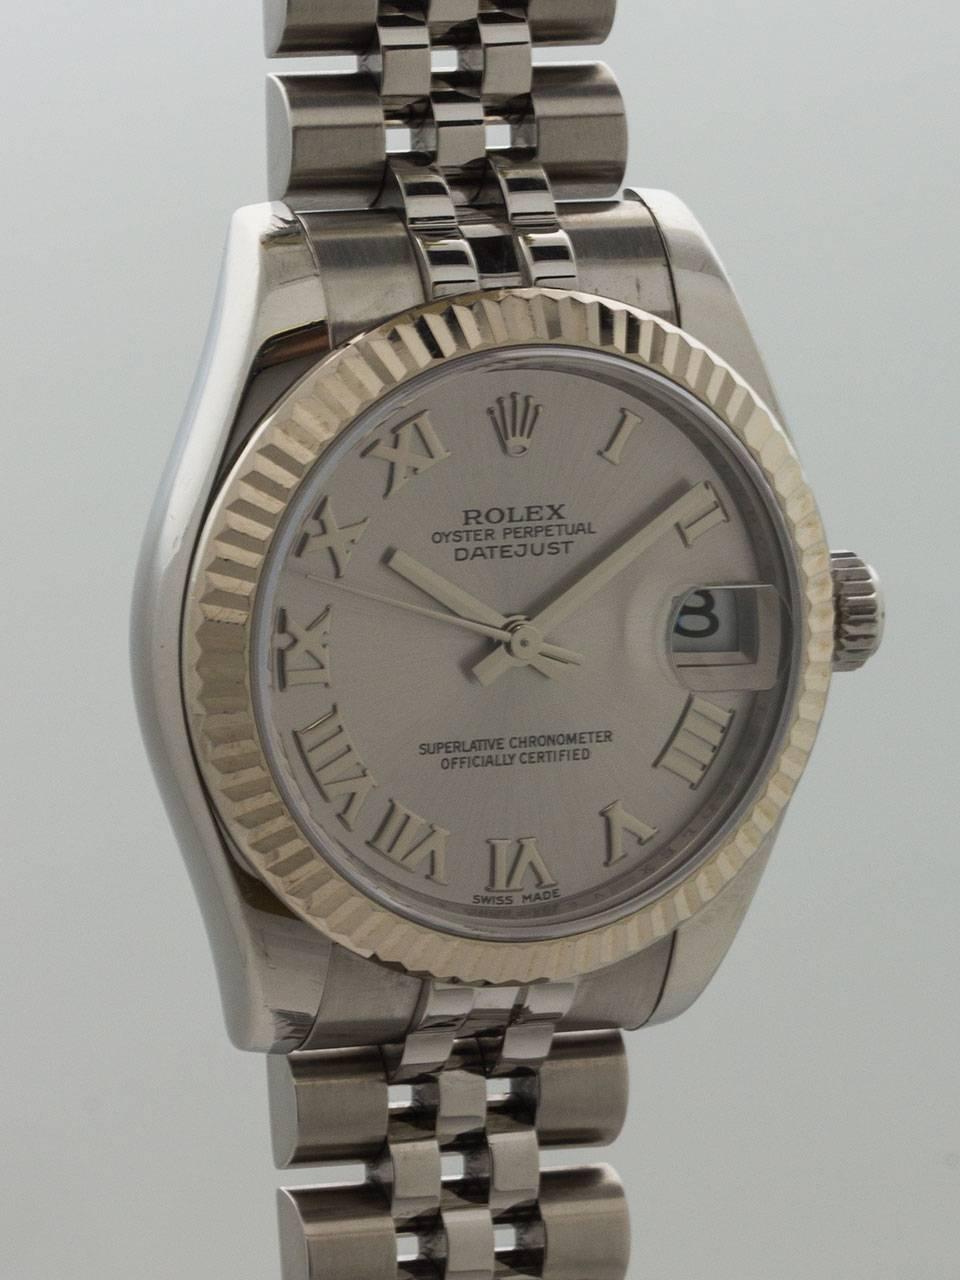 Rolex Stainless Steel Datejust Midsize ref 178274 serial no. V6 circa 2011. This example is the newer style Rolex with more robust case design and newer style heavier bracelet and clasp. Featuring a 31mm diameter case with 18K white gold fluted